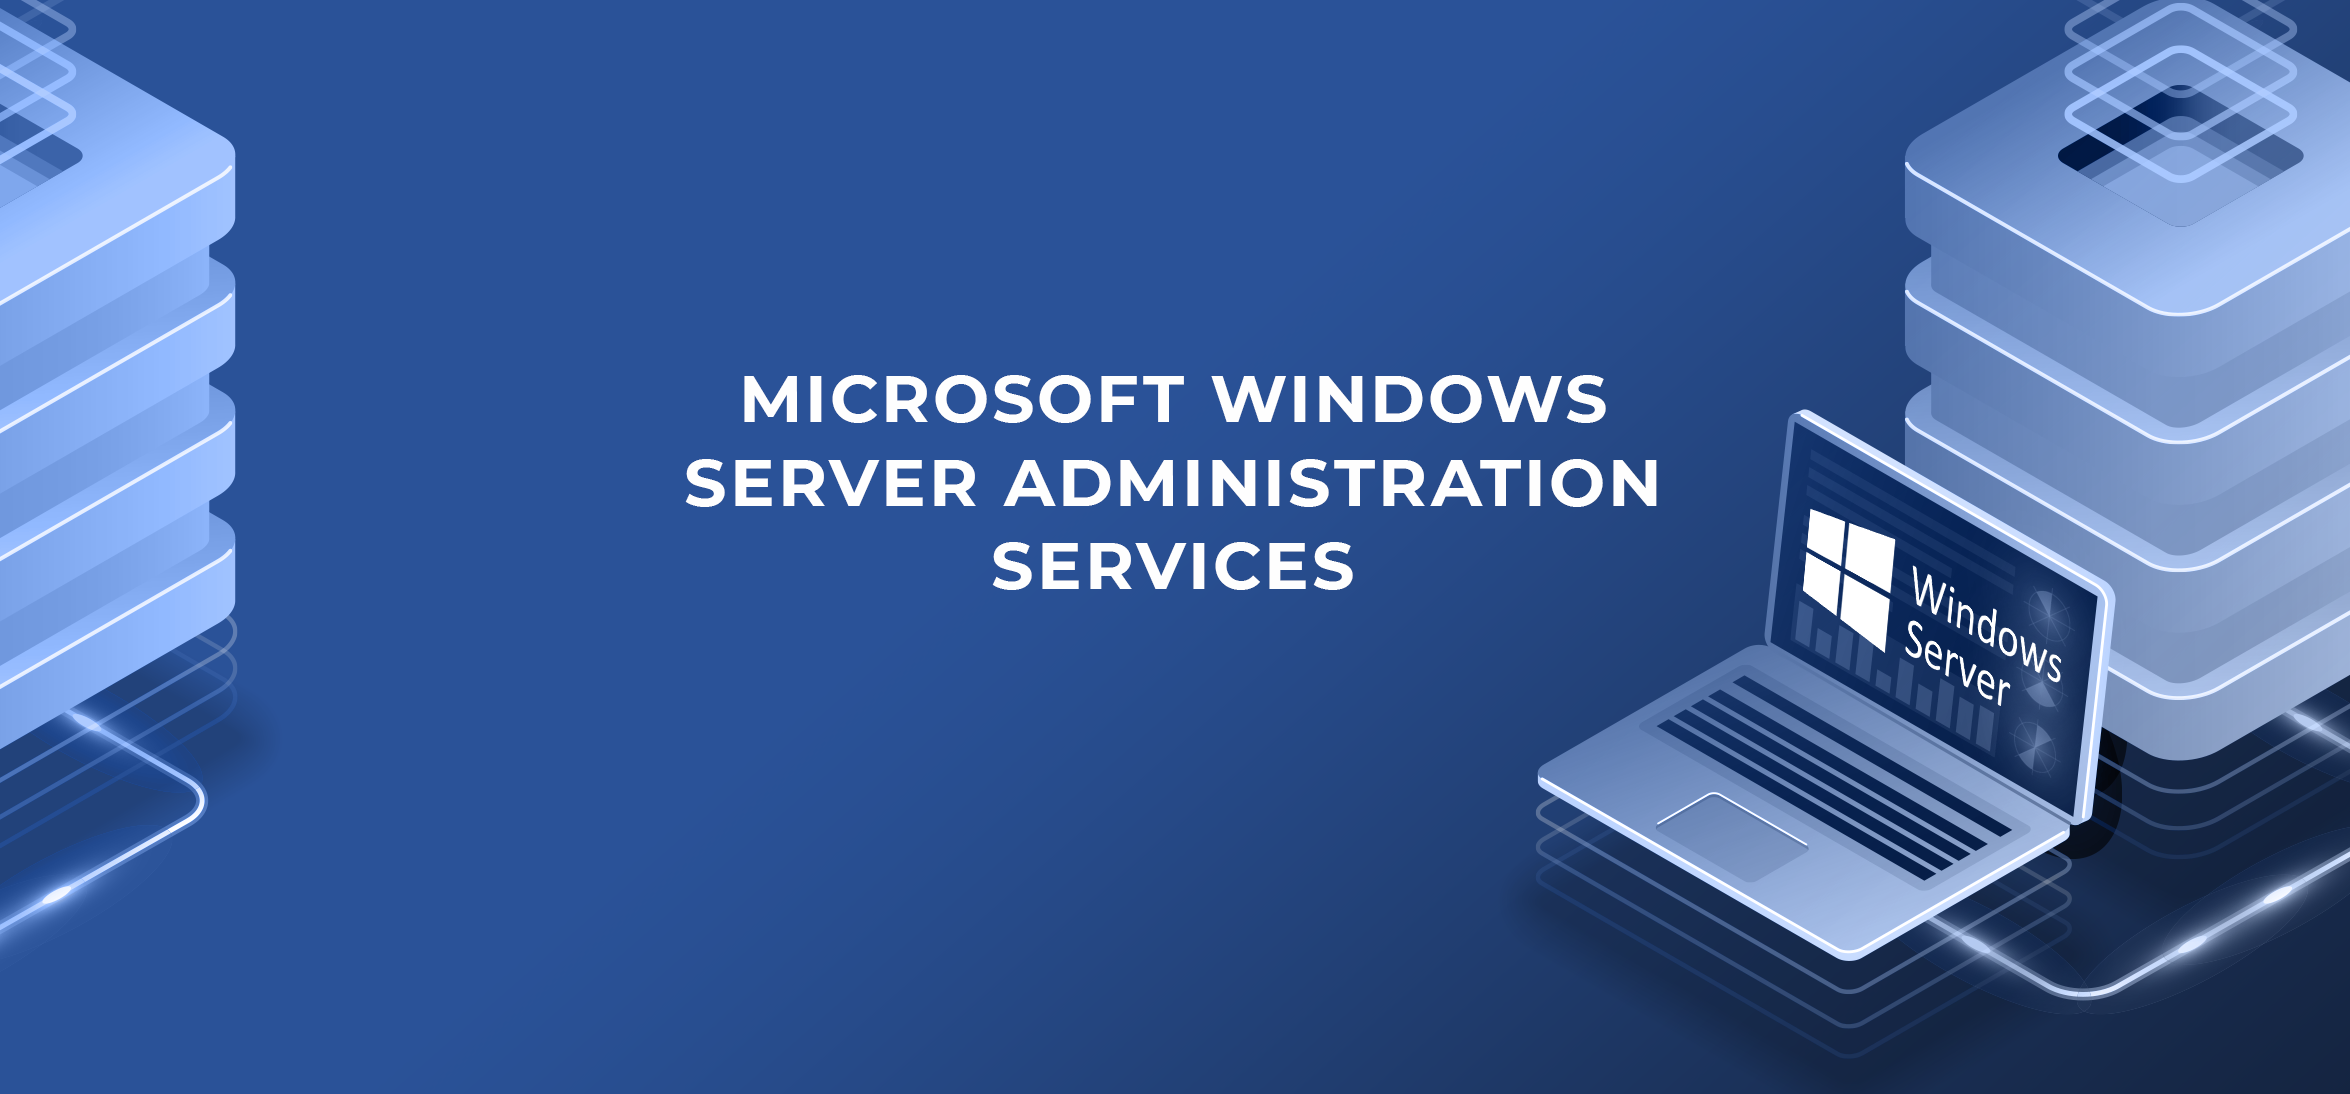 Effective Windows Server Administration and Support Solution Provider in Del Mar CA, 92014